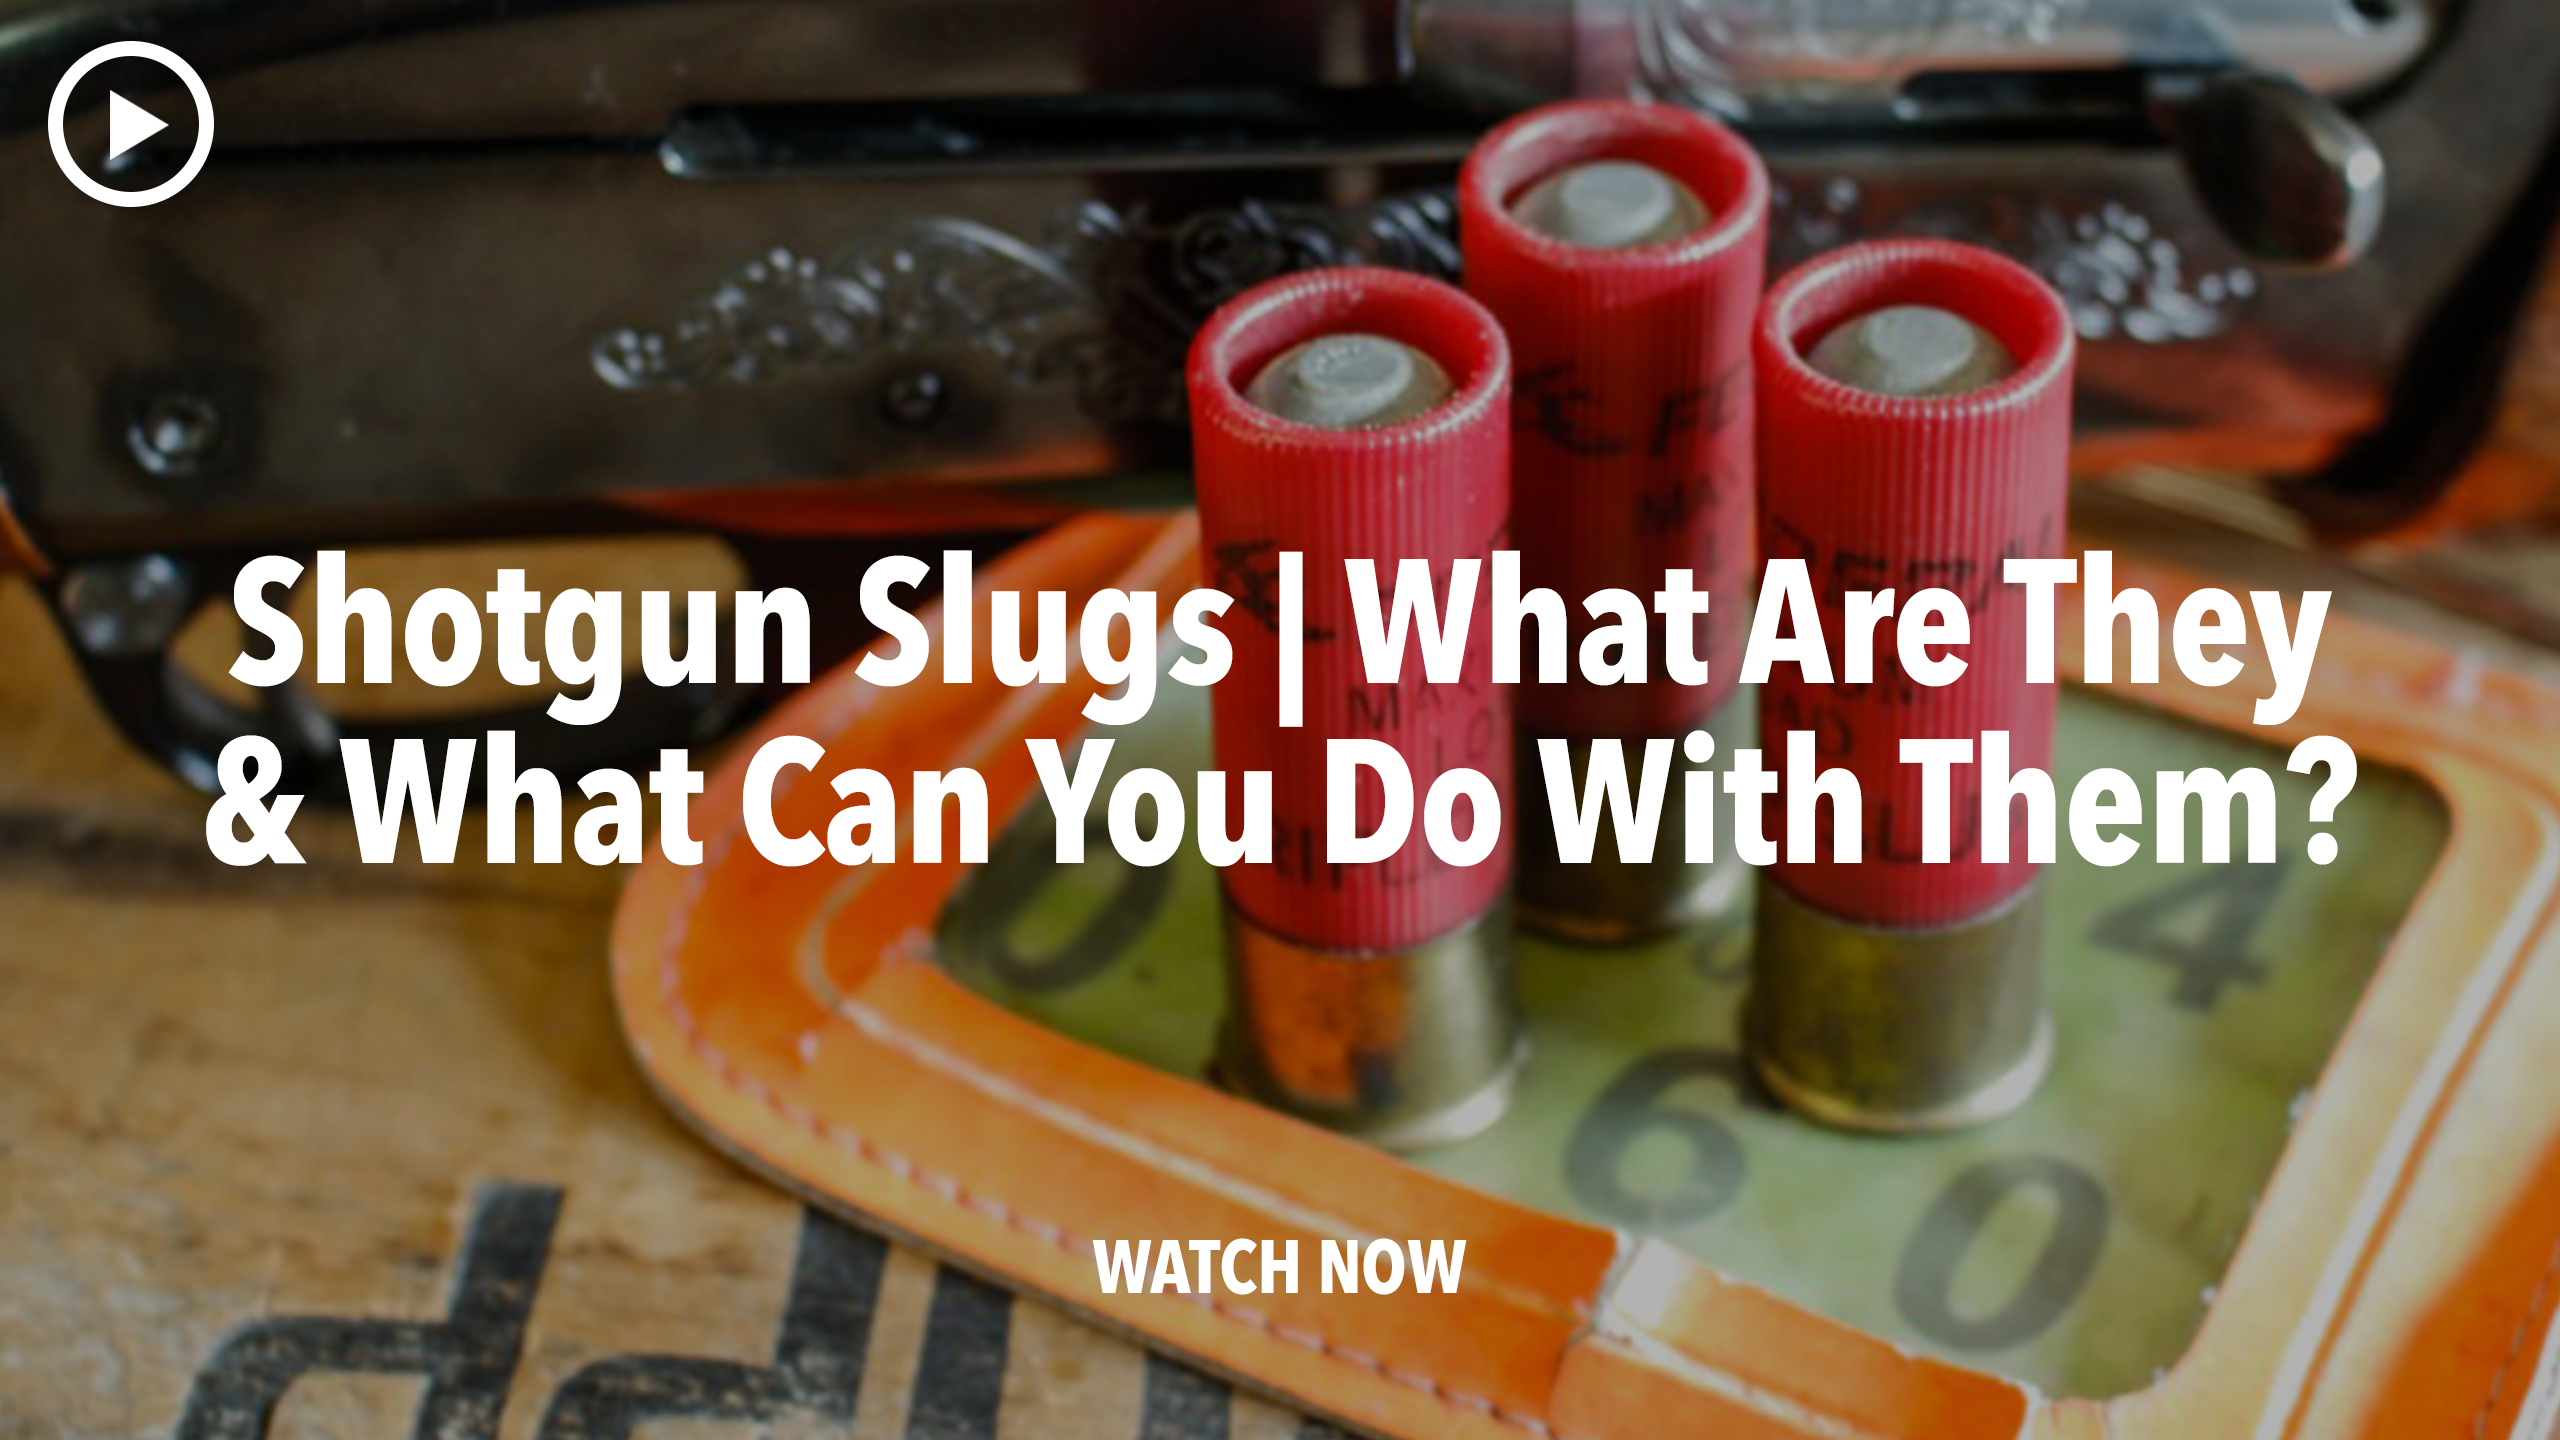 Shotgun Slugs — What Are They and What Can You Do With Them?